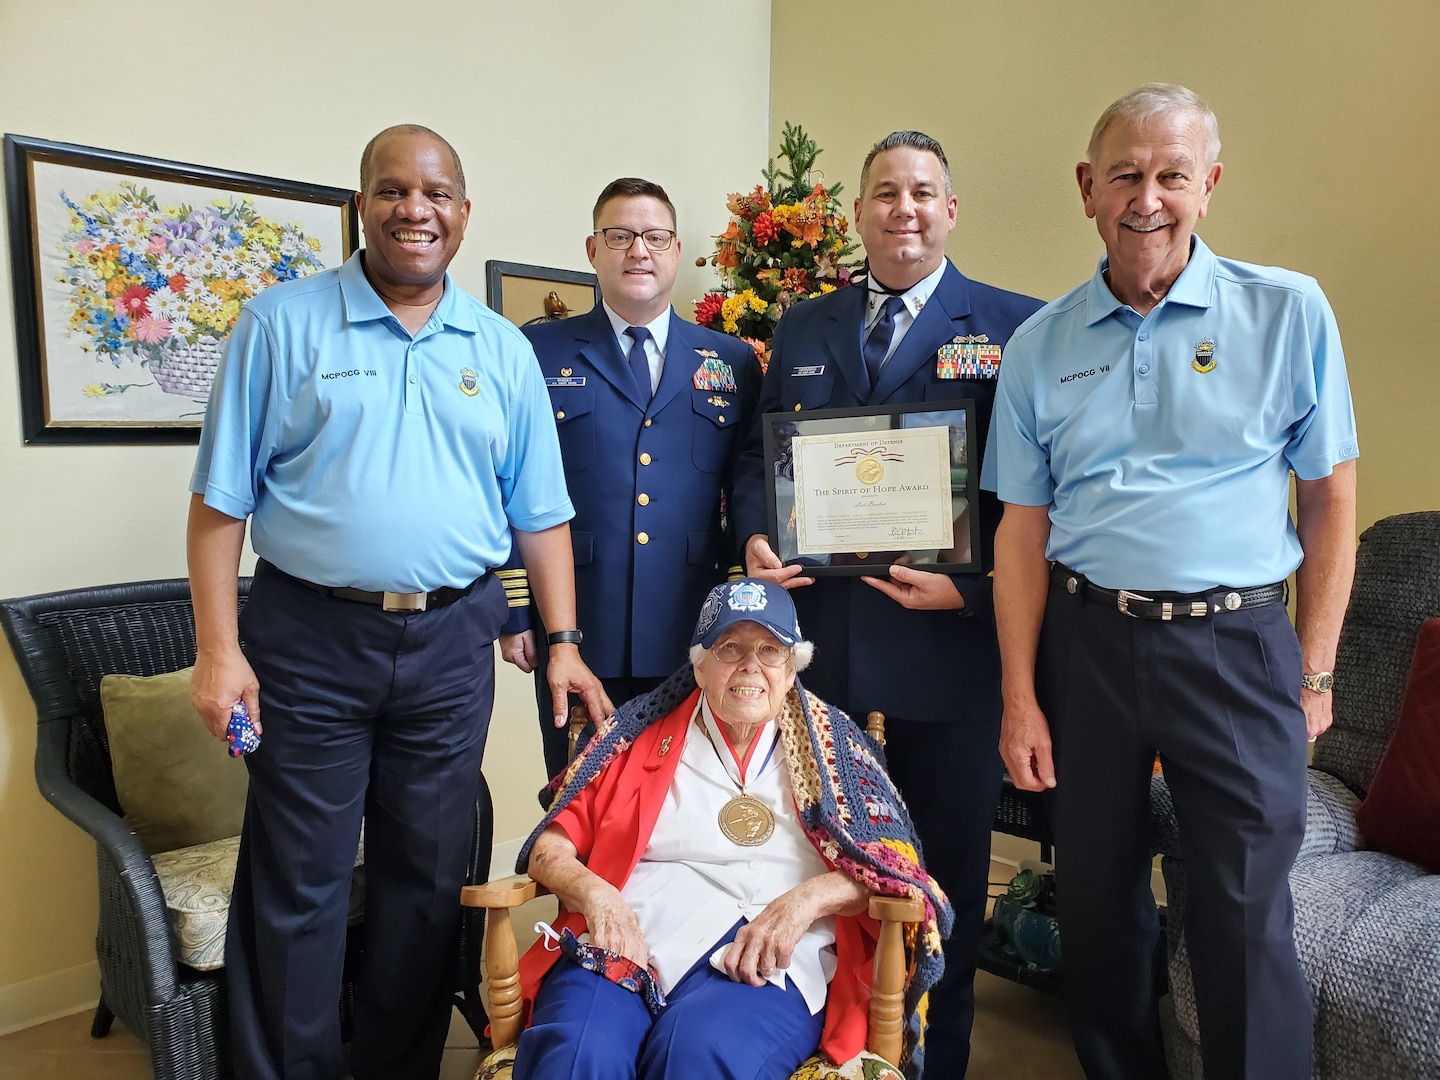 Lois Bouton, “The Coast Guard Lady,” is honored with the 2021 Spirit of Hope Award, Sept. 16, 2021, at Innisfree Senior Care Center, Rogers, Arkansas. The award is given to outstanding Americans whose patriotism and service epitomize courage, honor, duty, commitment, integrity, and selfless dedication. Photo by Coast Guard Auxiliarist Jesse Adams. 
(Left to Right) retired Master Chief Petty Officer Vince Patton, eighth MCPOCG, Capt. Ryan Rhodes, commander Sector Lower Mississippi River, Senior Chief Petty Officer Jameson Hannaman, Sector command senior chie, and retired Master Chief Petty Officer Rick Trent, seventh MCPOCG (Center) Master Chief Petty Officer Lois Bouton.